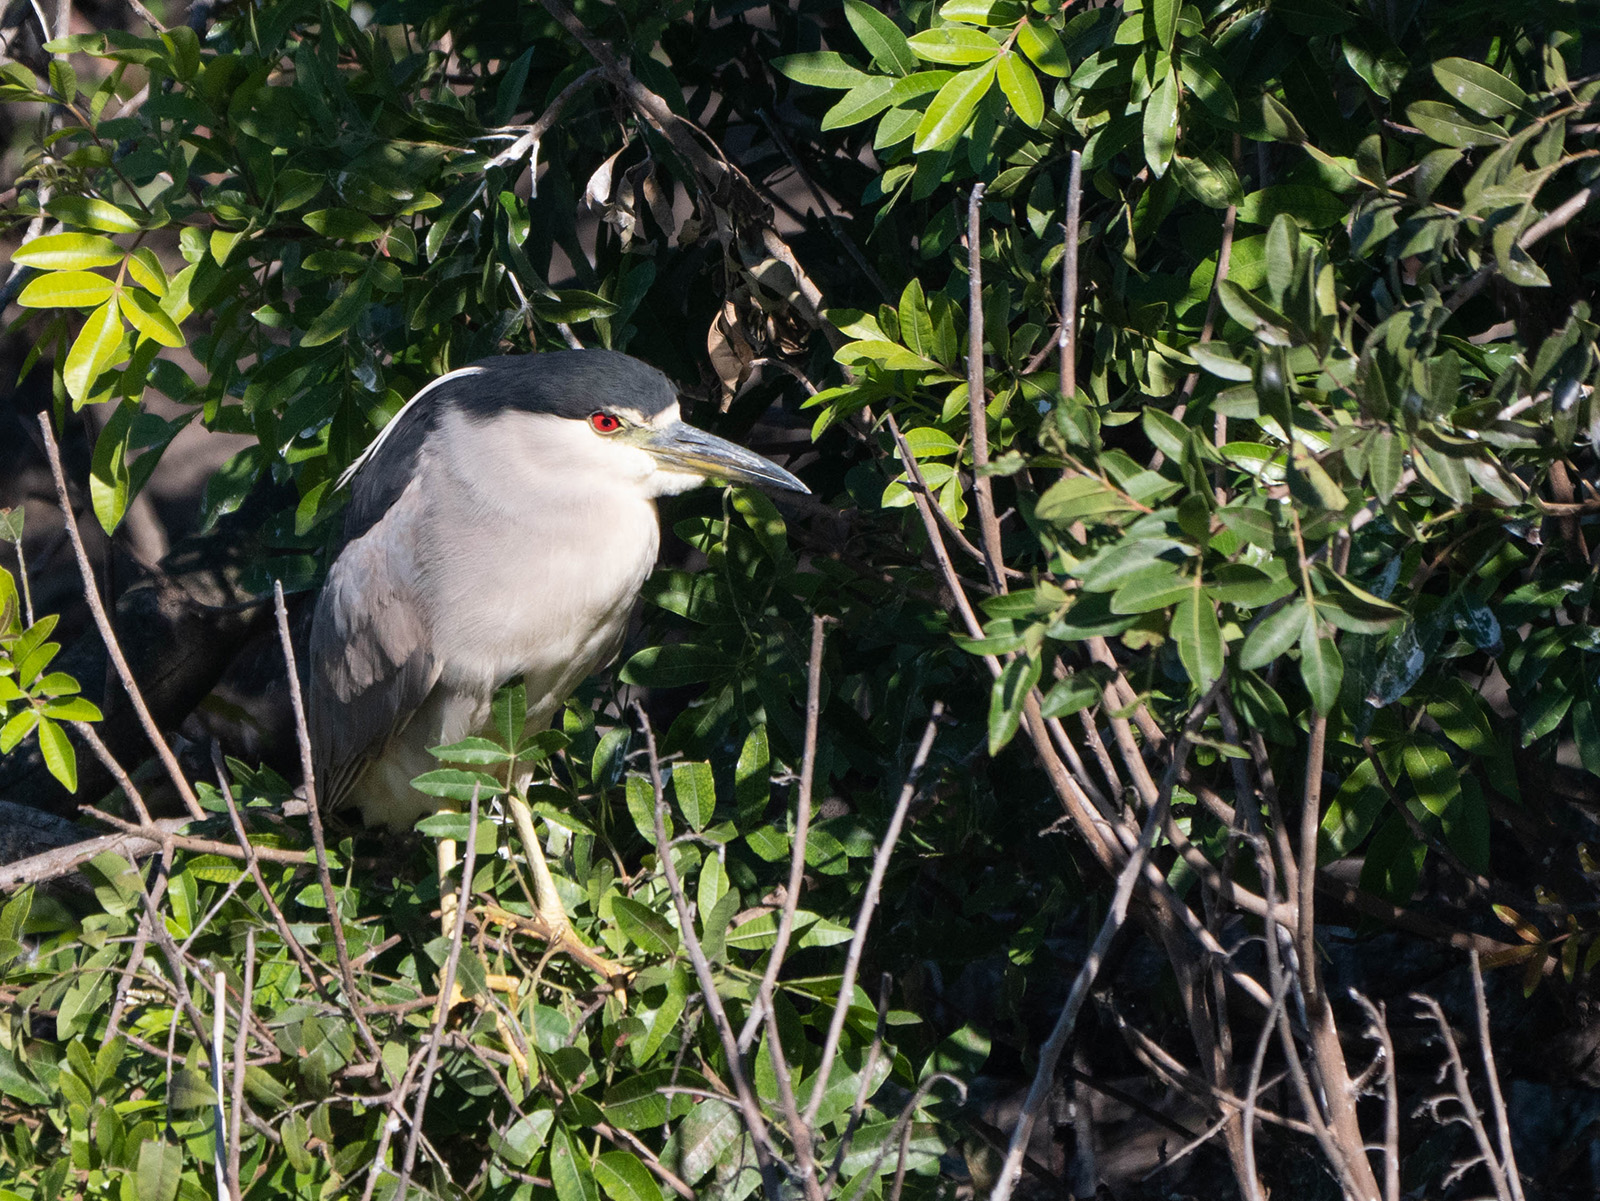 Black-crowned Night Heron perched in a tree, with leaves in the background. Photo: Cheryl Black.